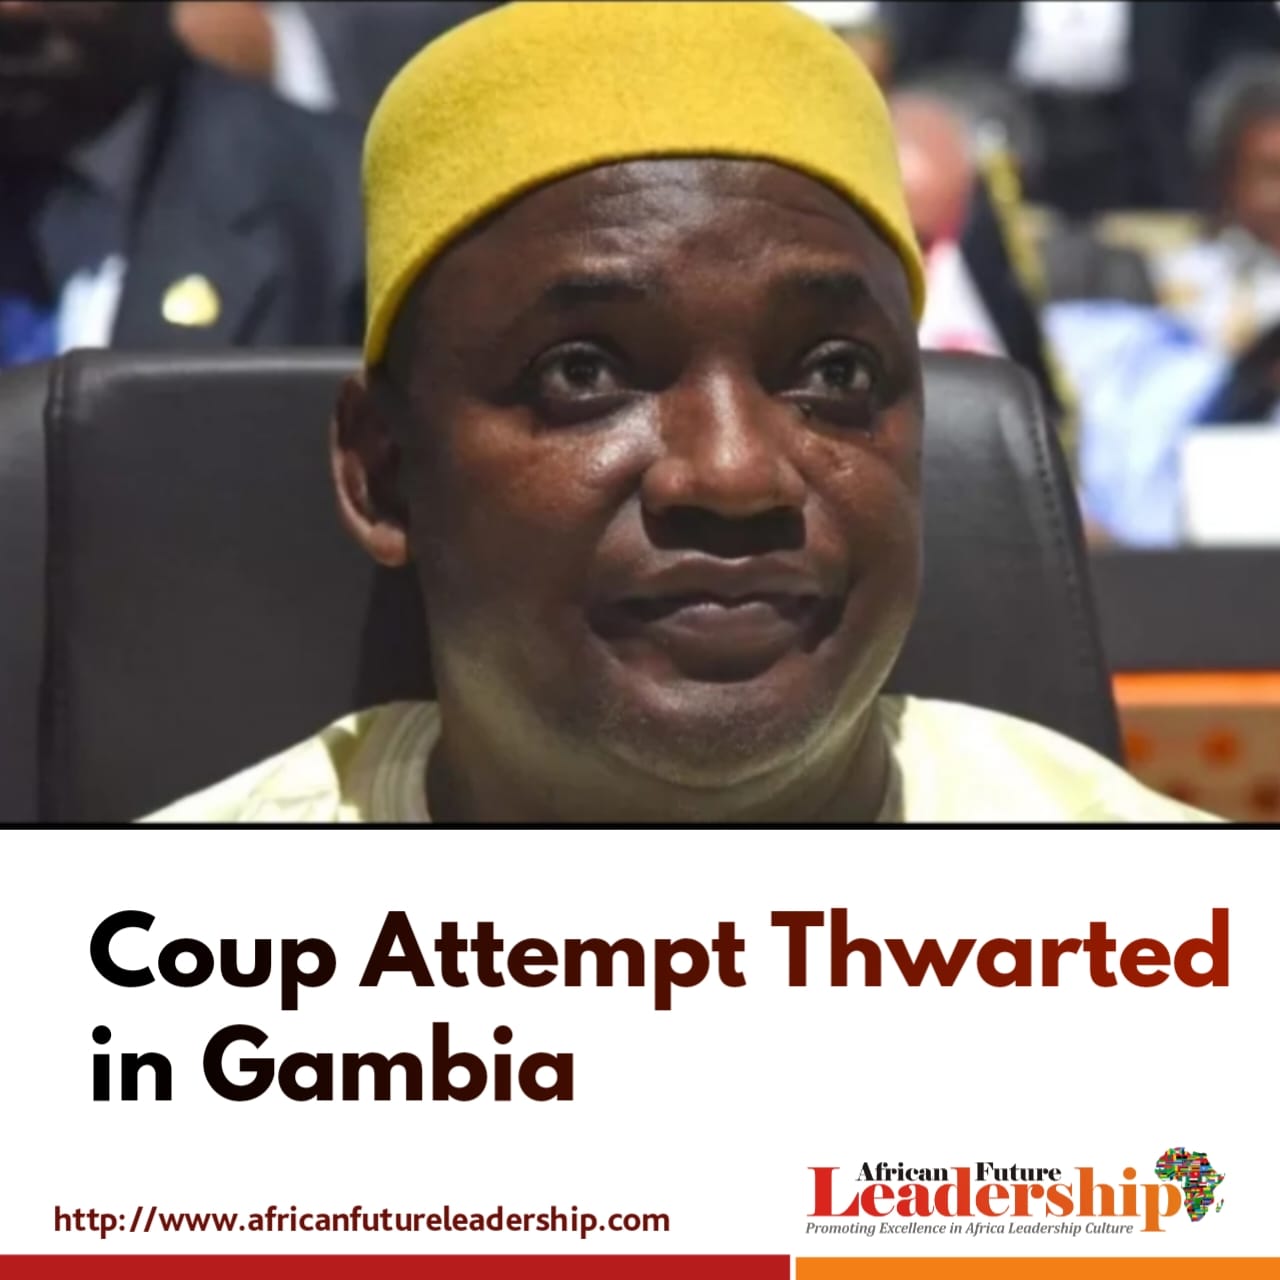 Coup Attempt Thwarted in Gambia